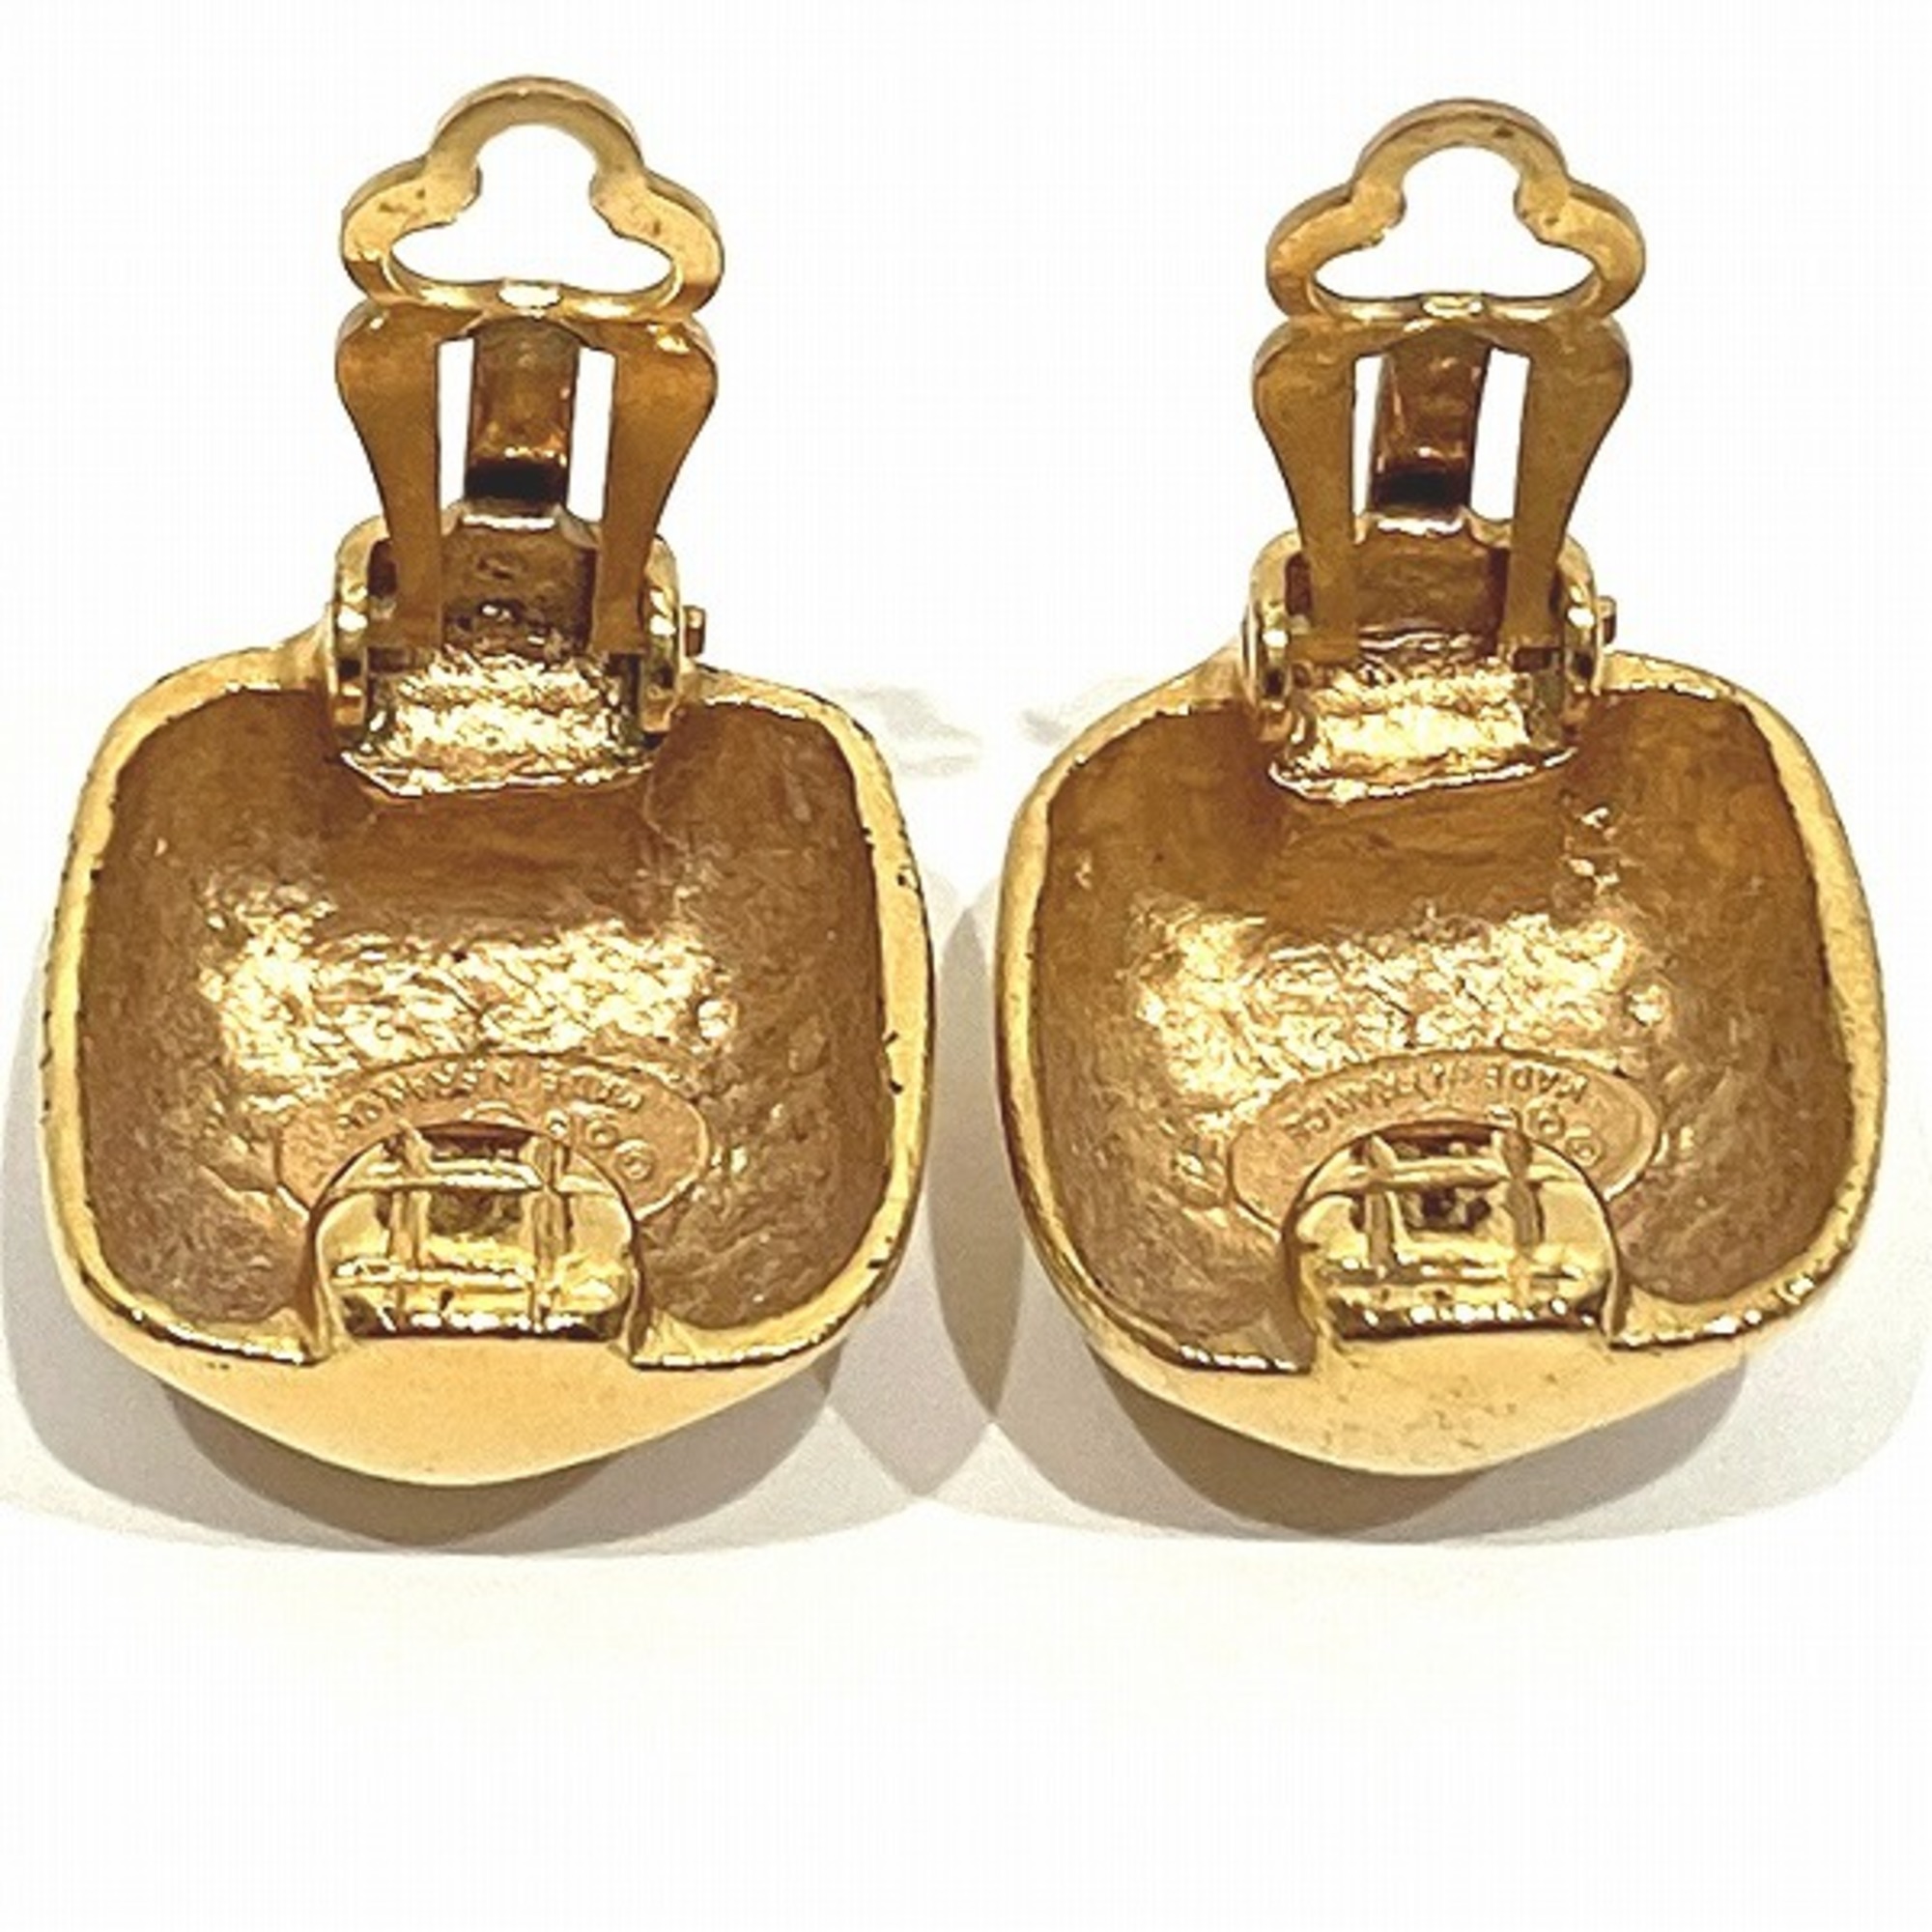 CHANEL Cocomark Gold Square 98A Brand Accessories Earrings Ladies